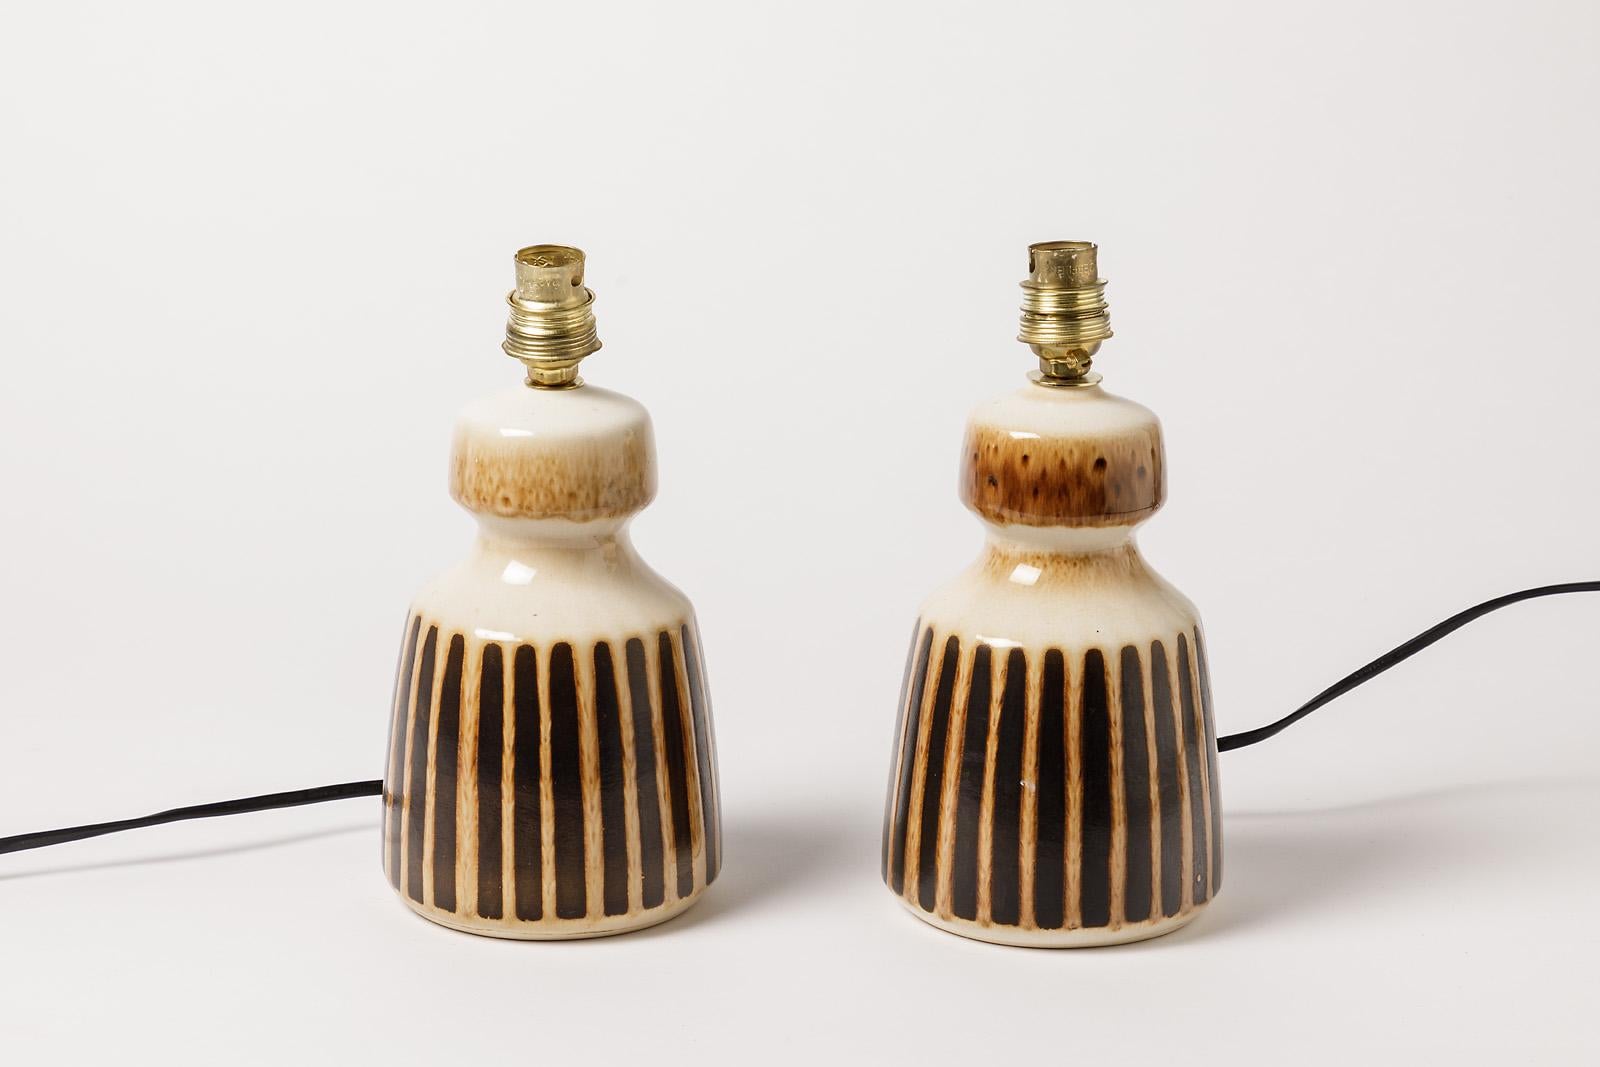 Susex England

Decorative brown and white pair of ceramic table lamps by susex

circa 1970 realised in England

Original perfect conditions

Ceramic dimensions: height 19 cm Large 12 cm
With electric system: height 24 cm.